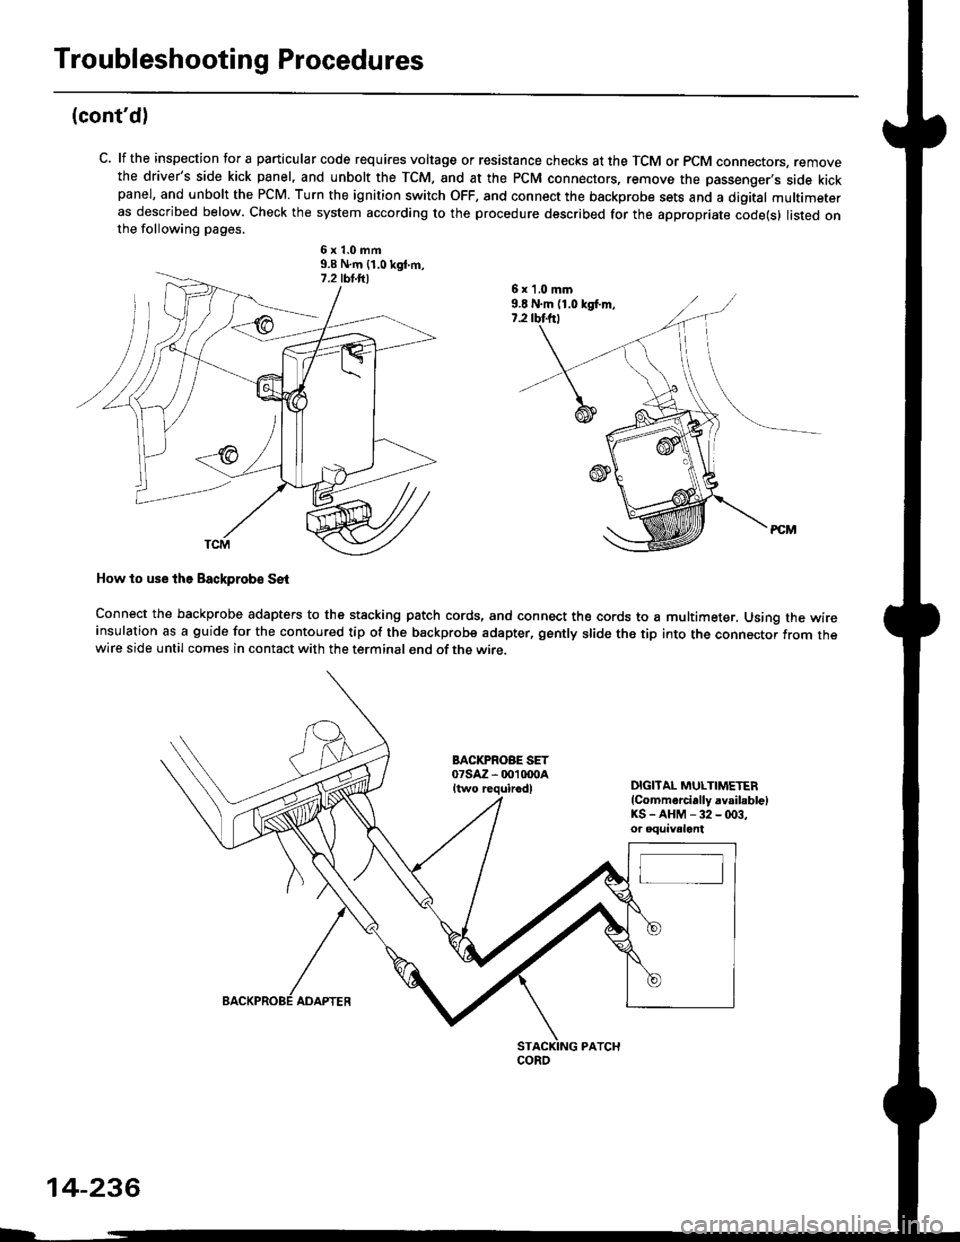 HONDA CIVIC 1998 6.G Owners Manual Troubleshooting Procedures
(contd)
C. lf the inspection for a particular code requires voltage or resistance checks at the TCM or PCM connectors, removethe drivers side kick panel, and unbolt the TC